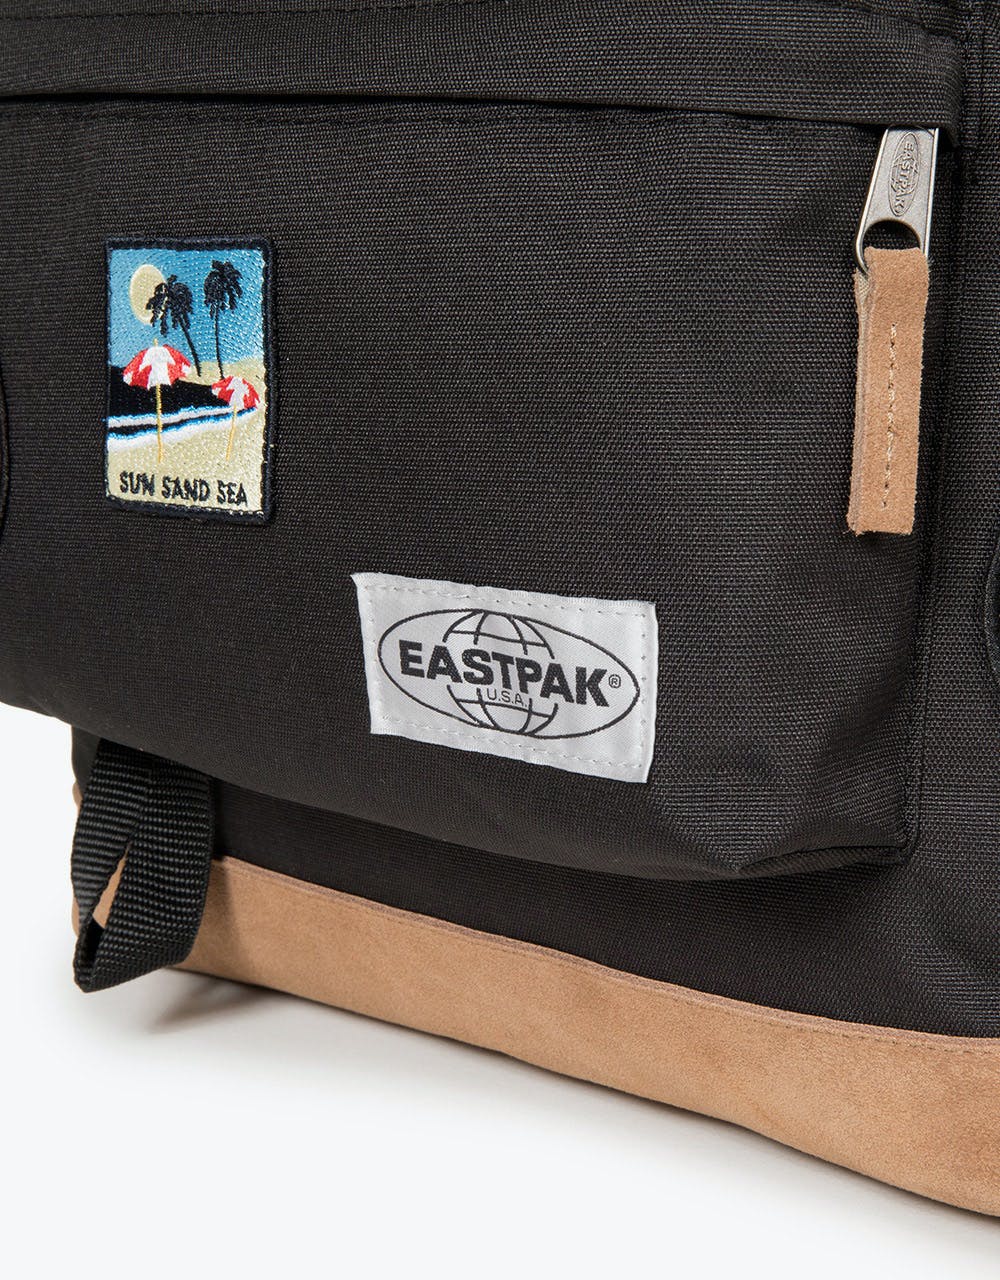 Eastpak Wyoming Backpack - Into Patch Black